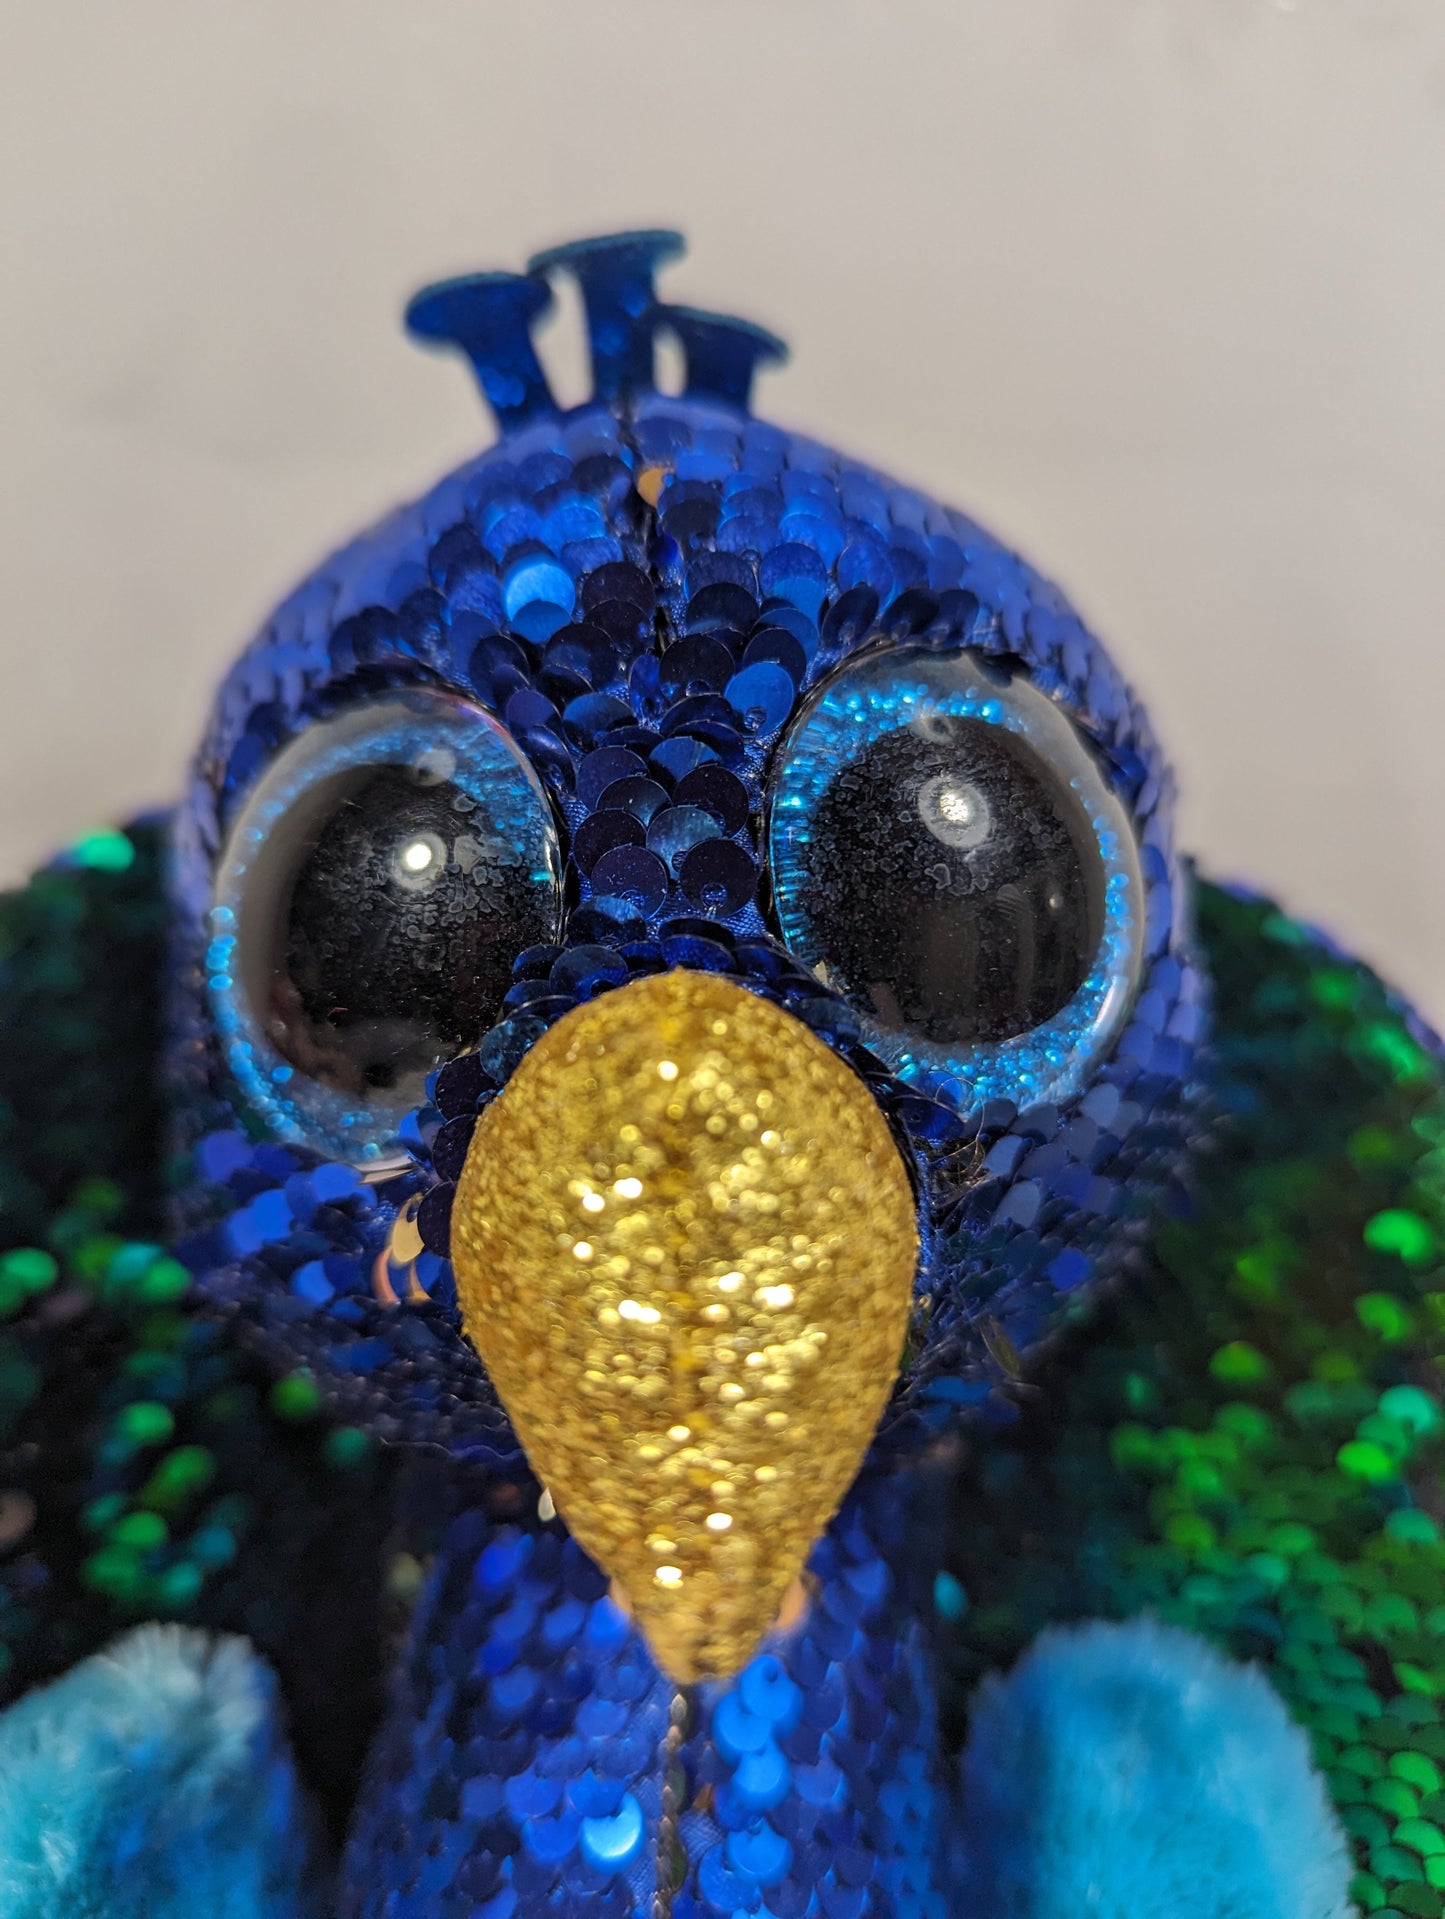 Ty Flippables - Tyson the Blue Sequined Peacock (9 In) Scuffed eyes - Vintage Beanies Canada